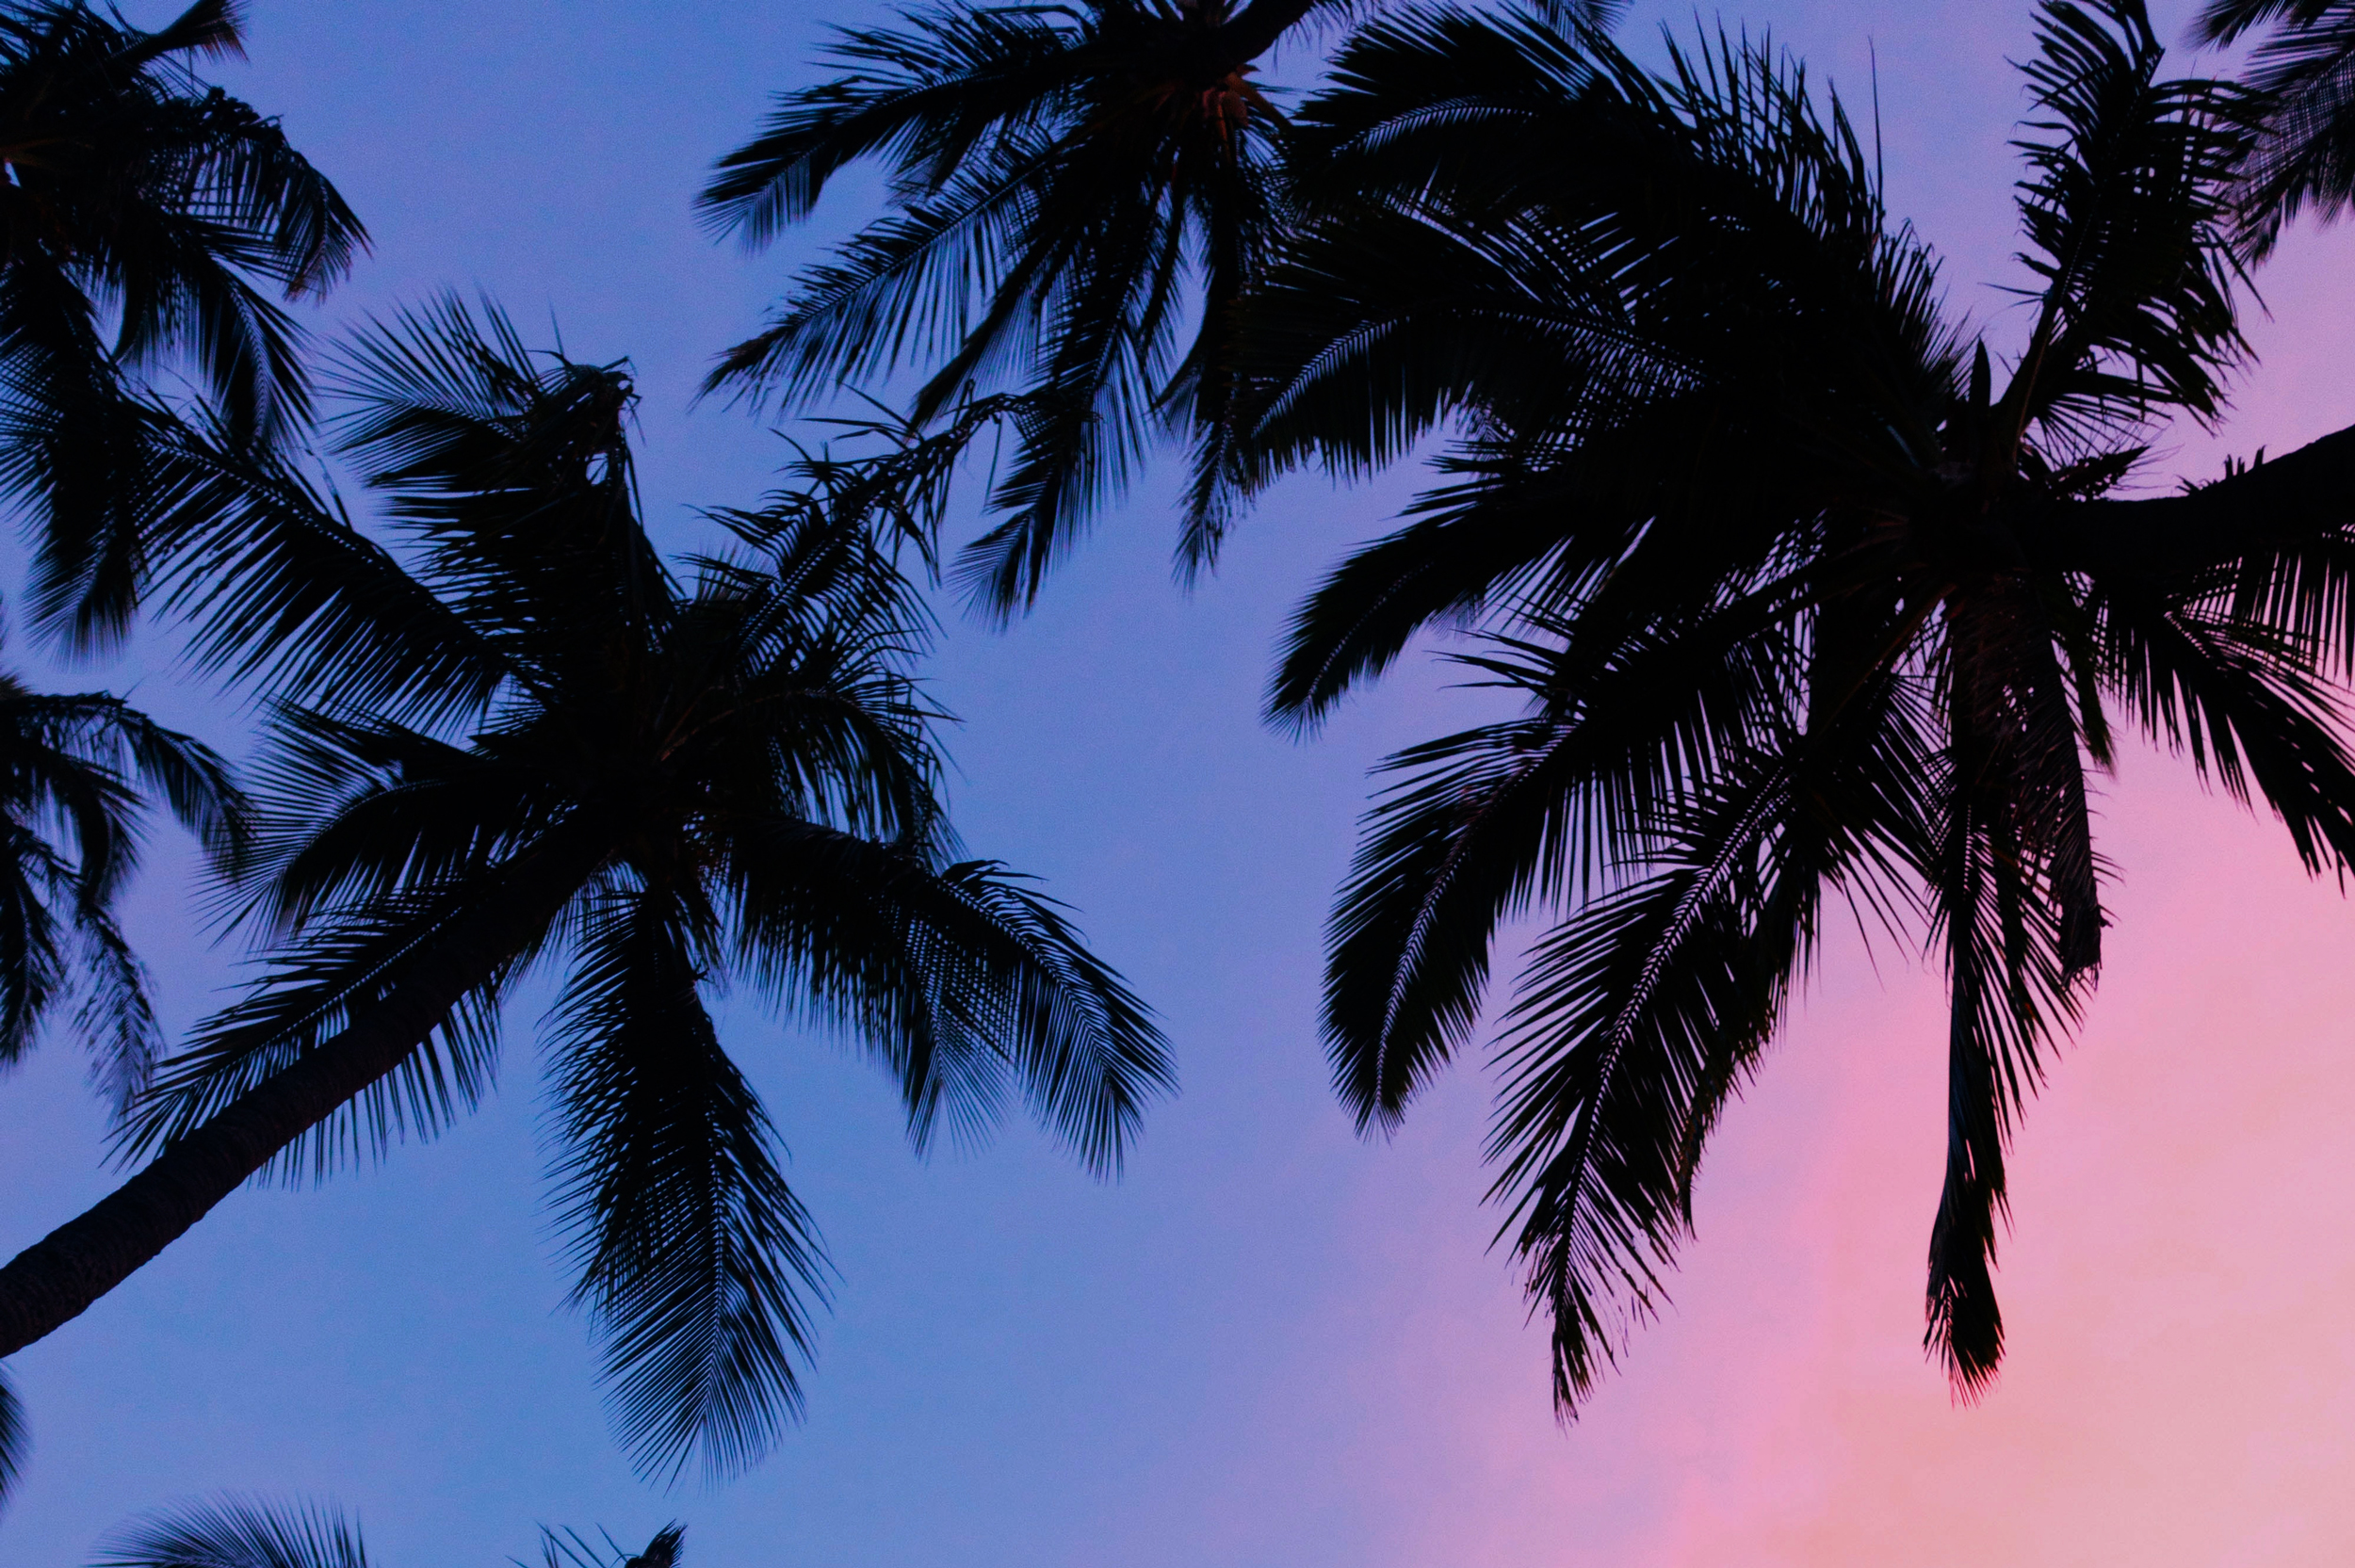 Palm trees over a sunset sky